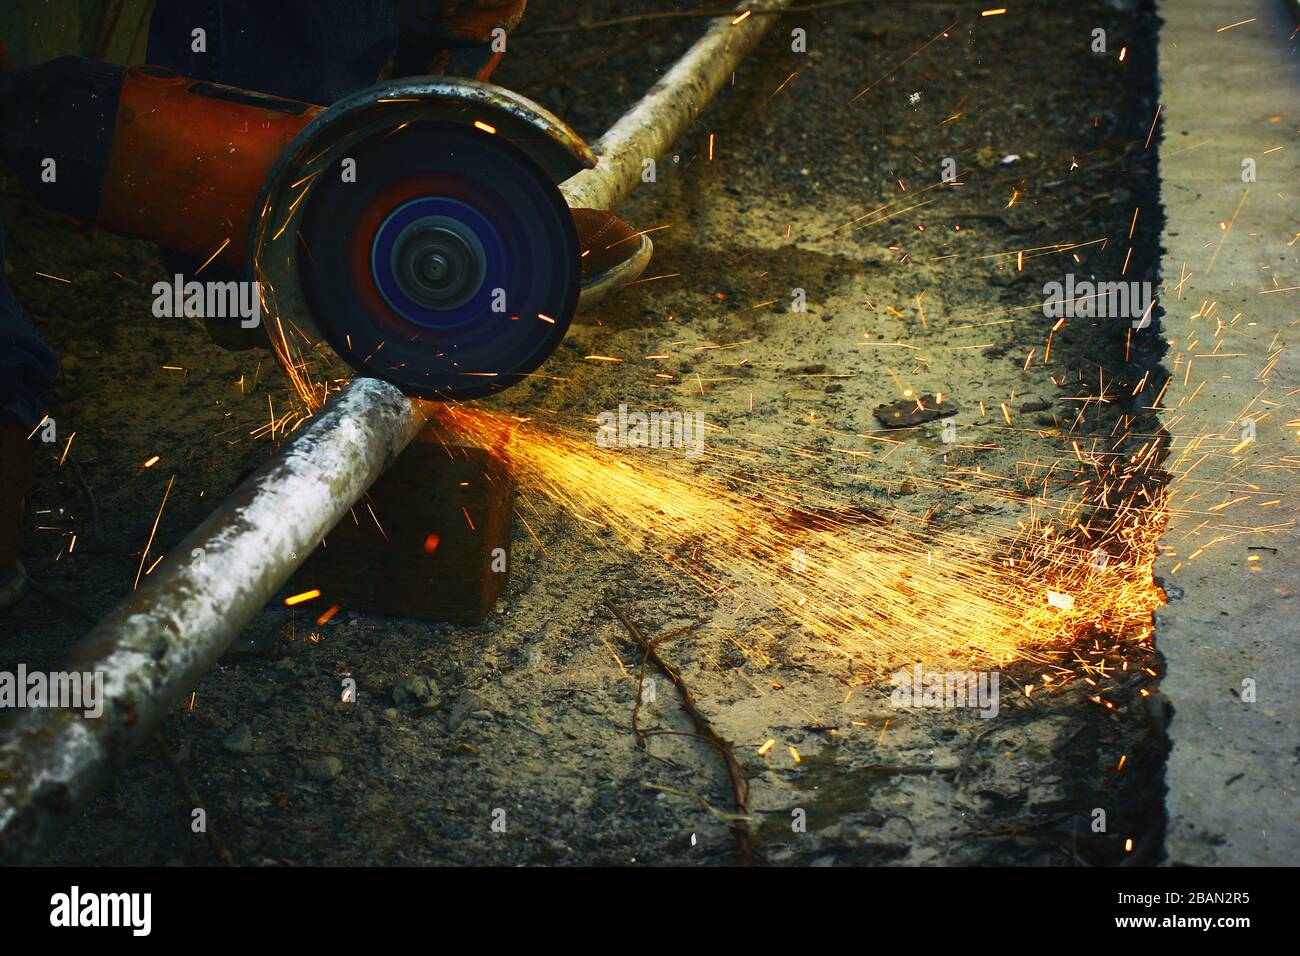 A angular grinding machine cutting a metal tube with a spurks bunch Stock Photo